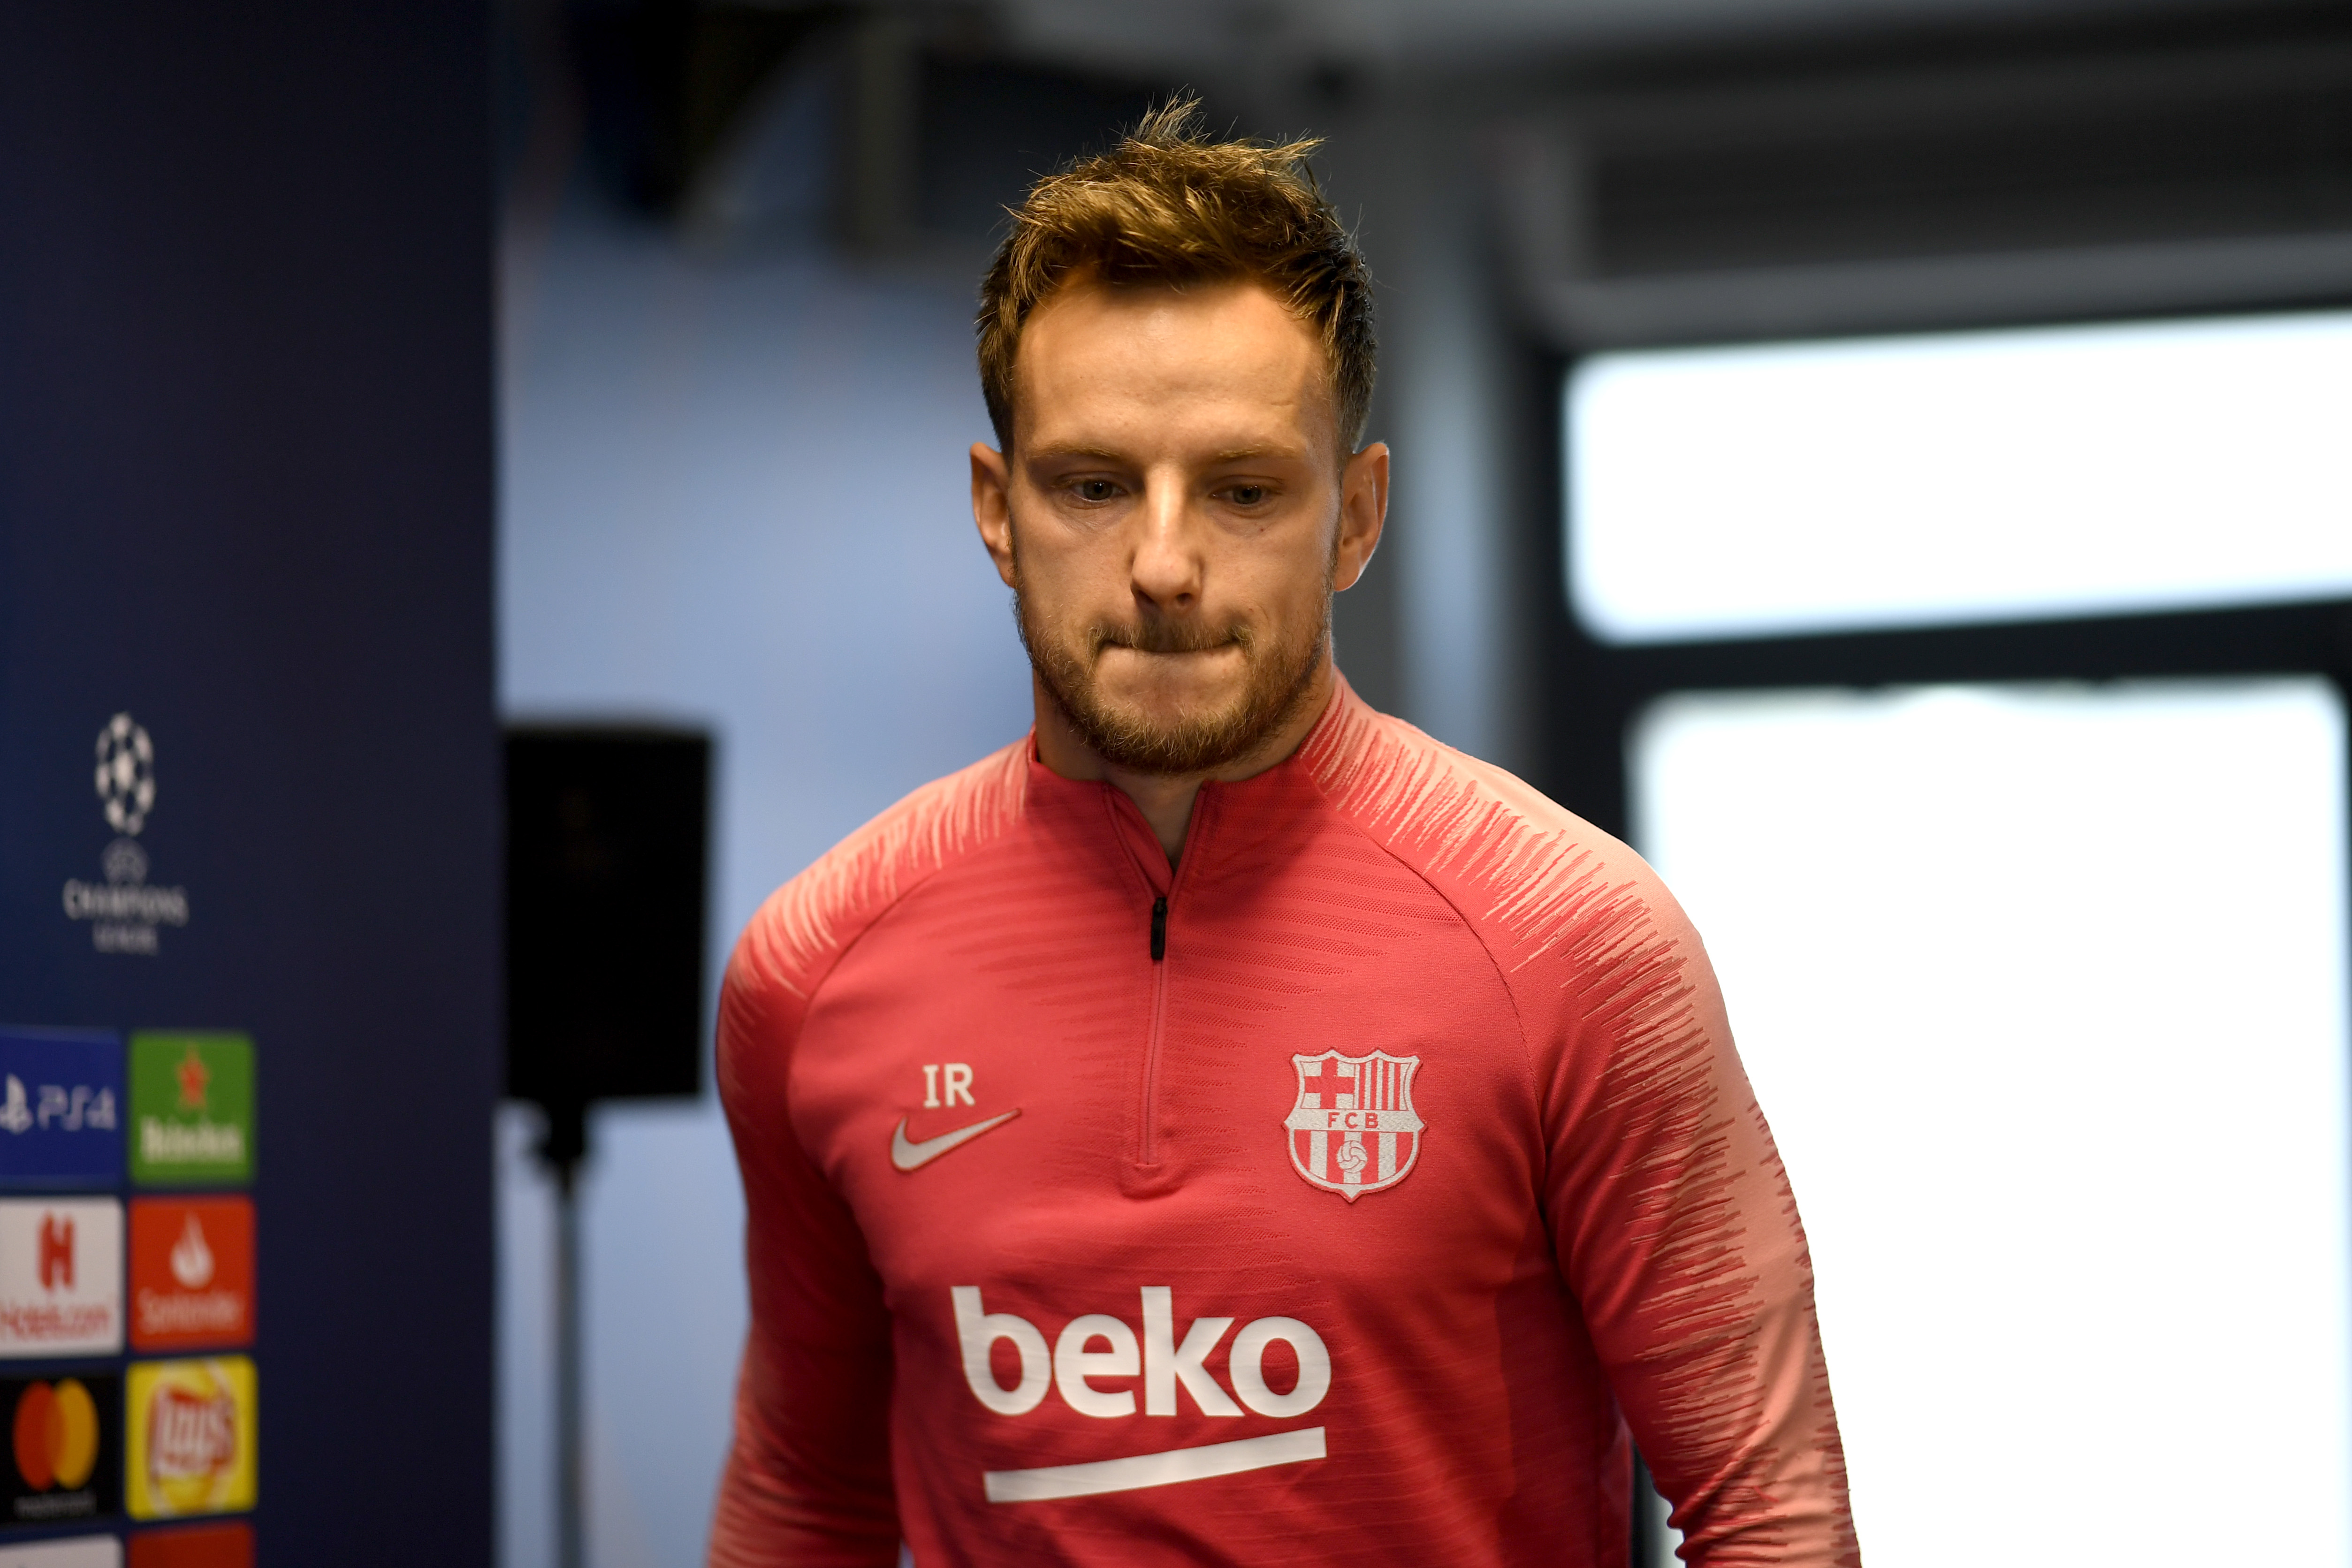 BARCELONA, SPAIN - APRIL 30: Ivan Rakitic of Barcelona attends an FC Barcelona press conference ahead of their UEFA Champions League semi-final first leg match against Liverpool. On April 30, 2019 in Barcelona, Spain. (Photo by Alex Caparros/Getty Images)